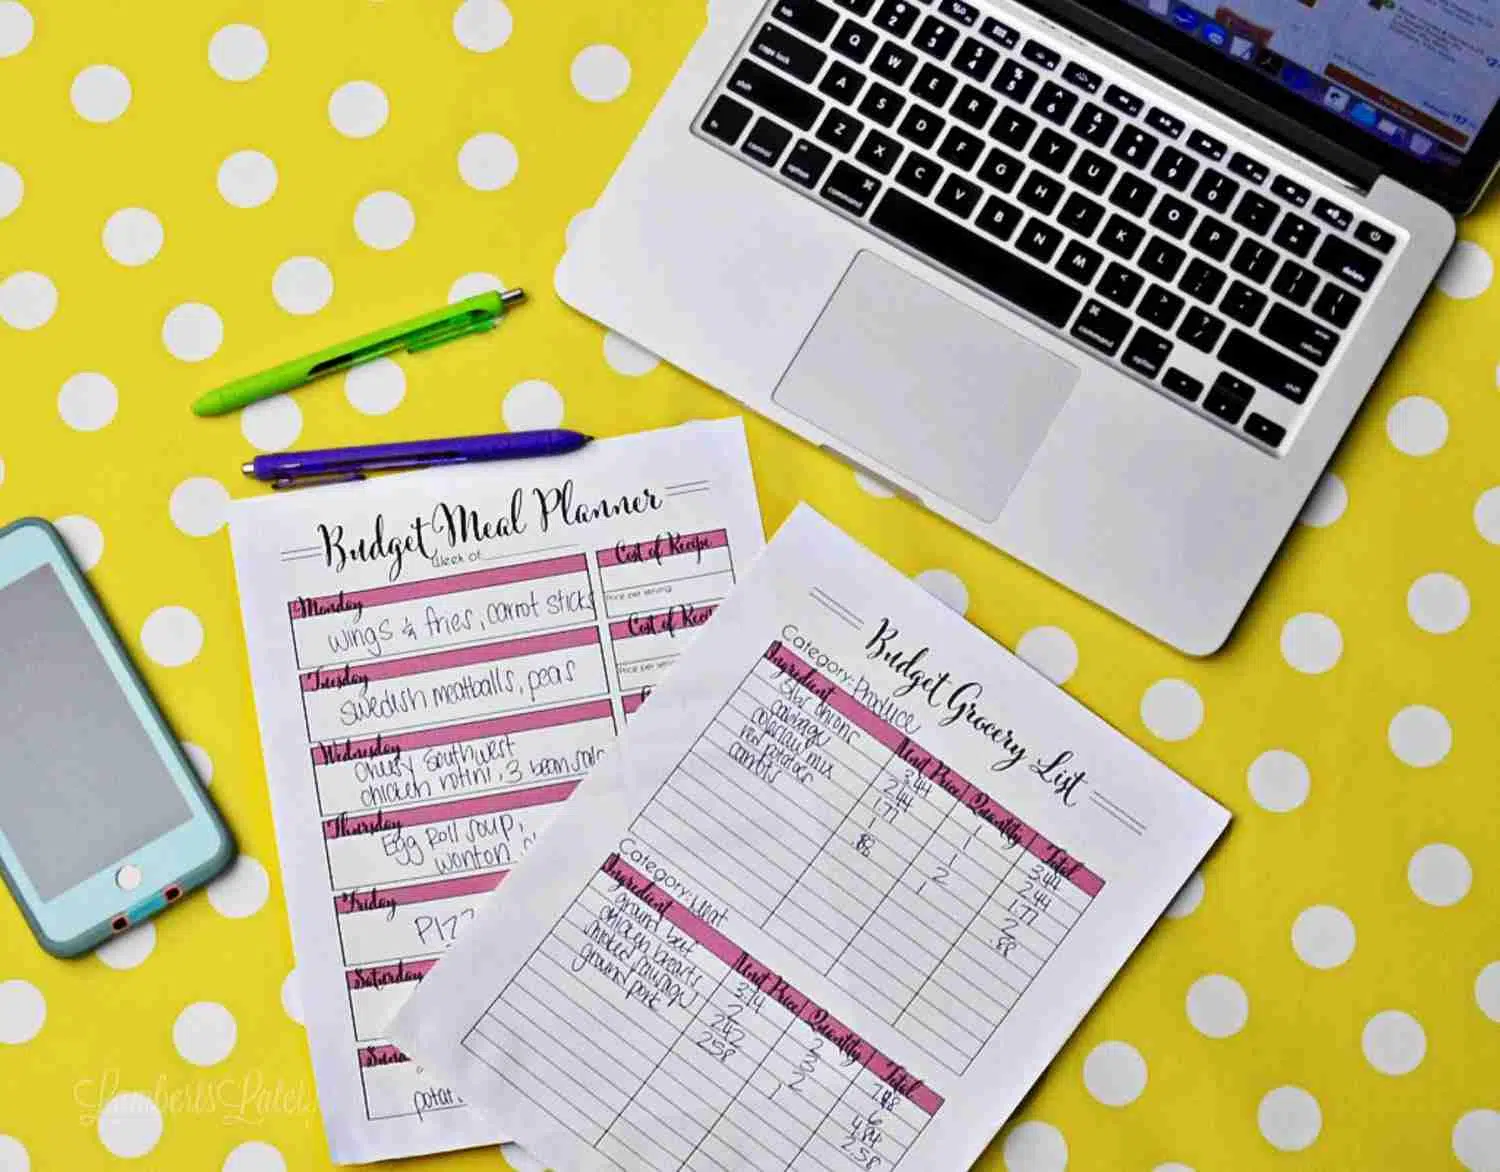 computer, budget grocery planning printables on a yellow polka dot background.